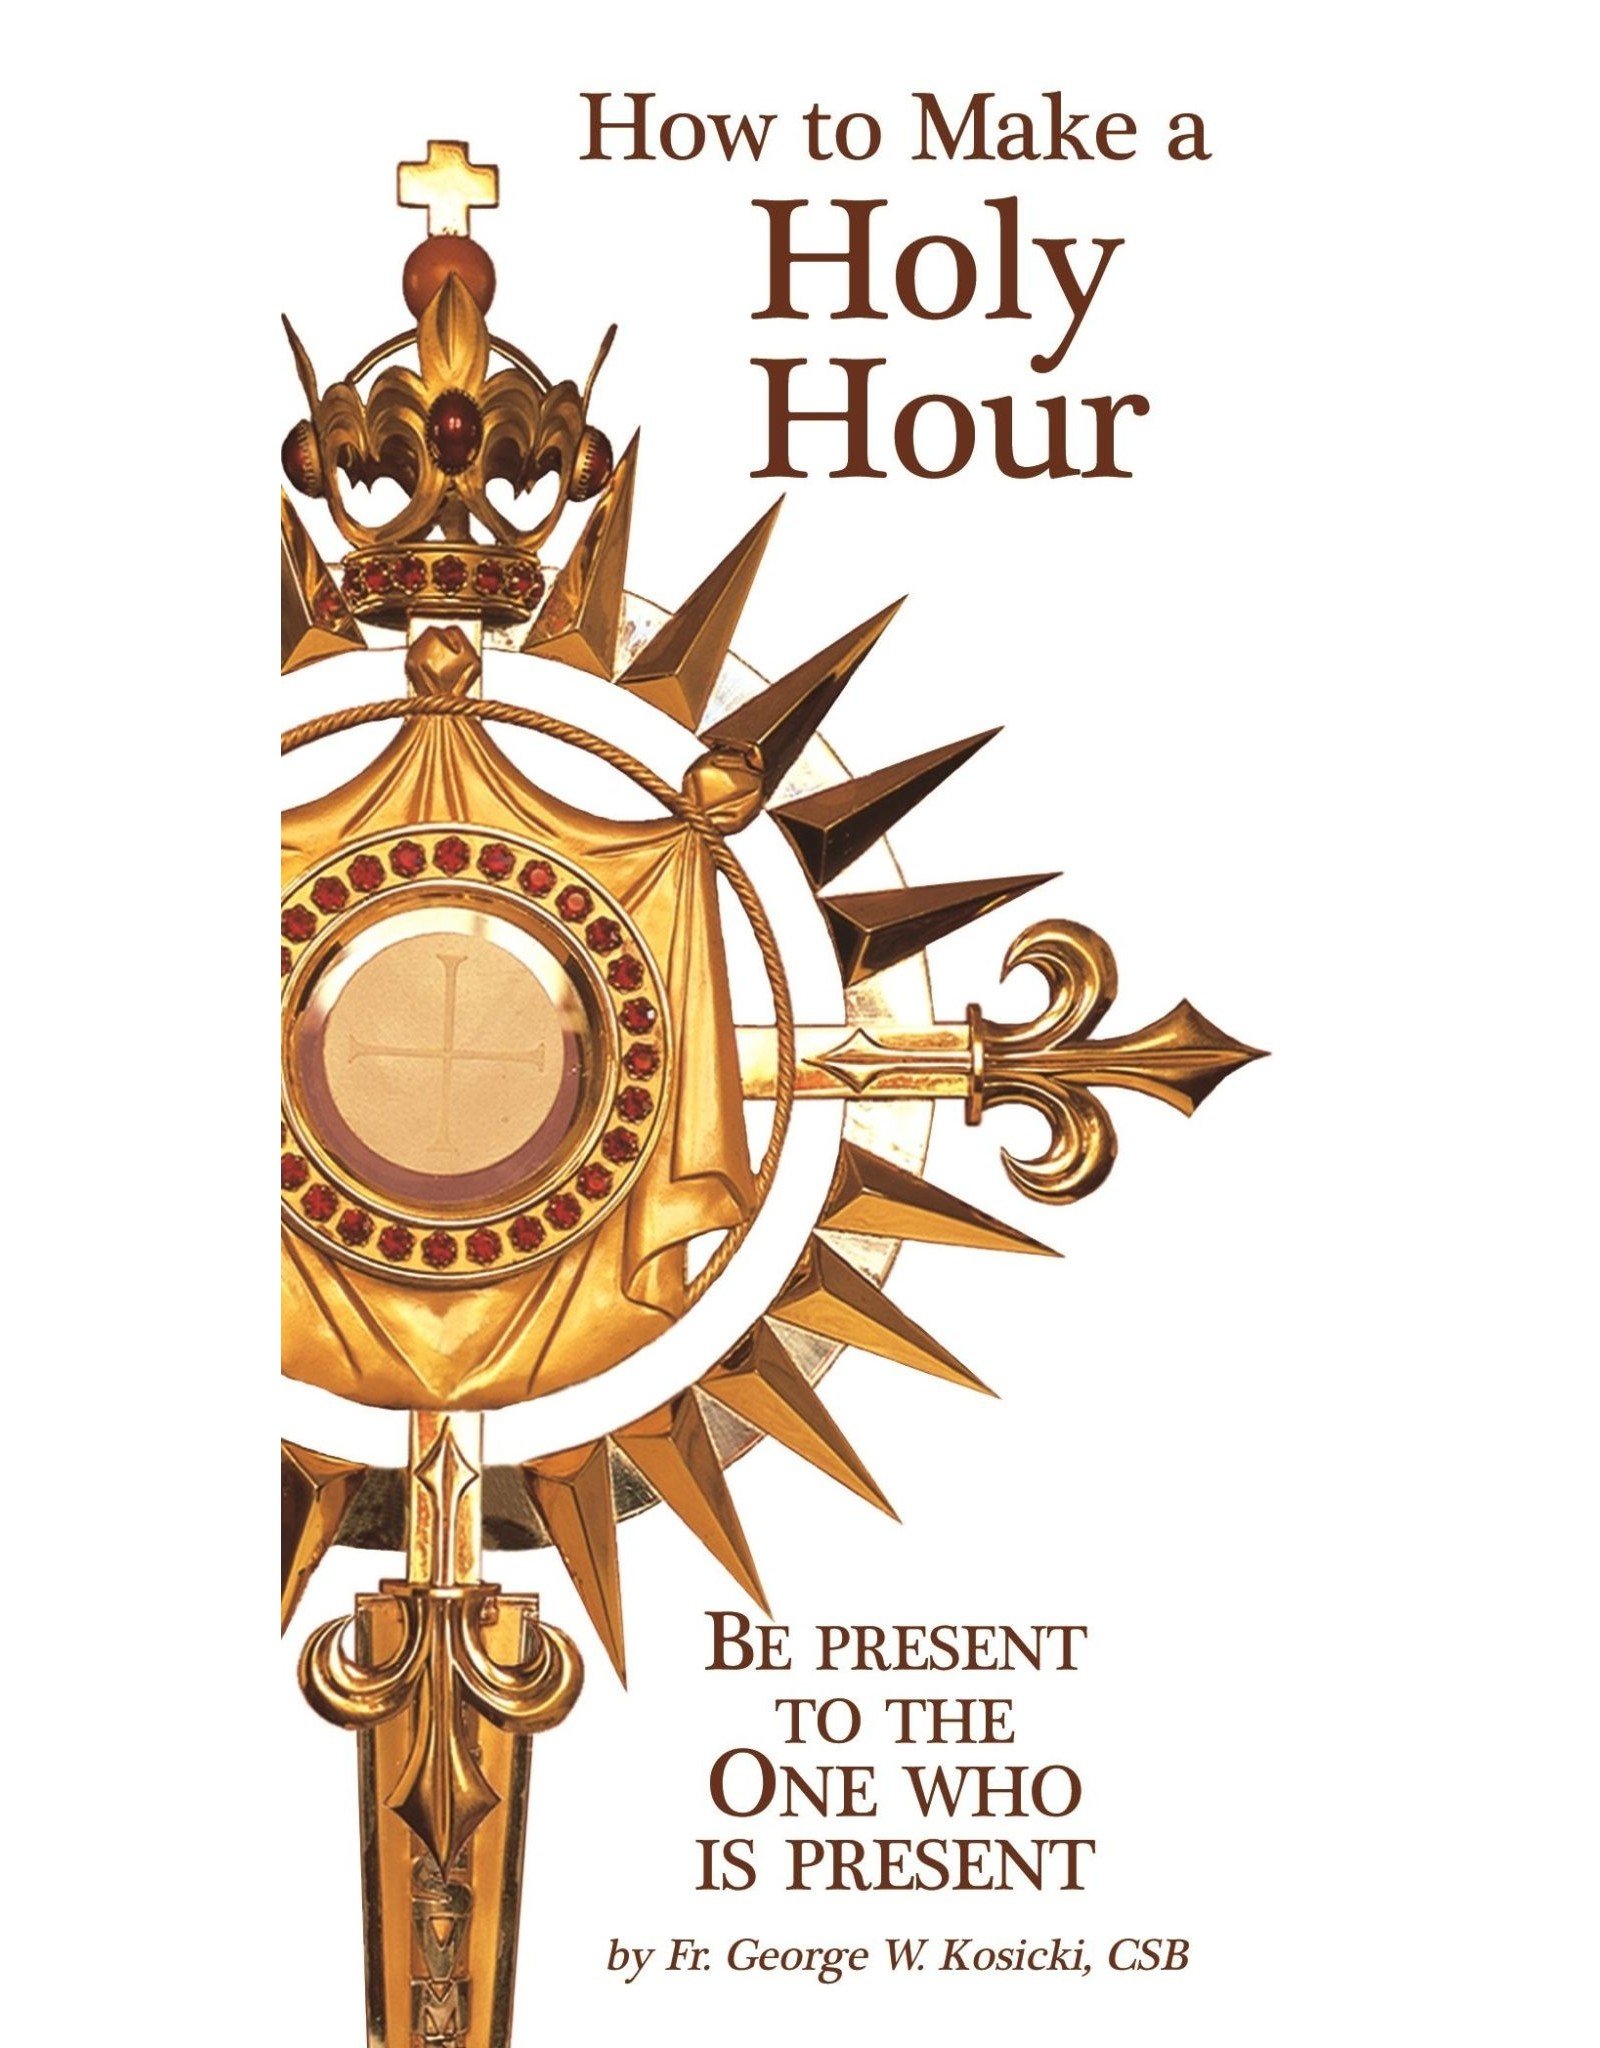 Association of Marian Helpers HOW TO MAKE A HOLY HOUR PAMPHLET